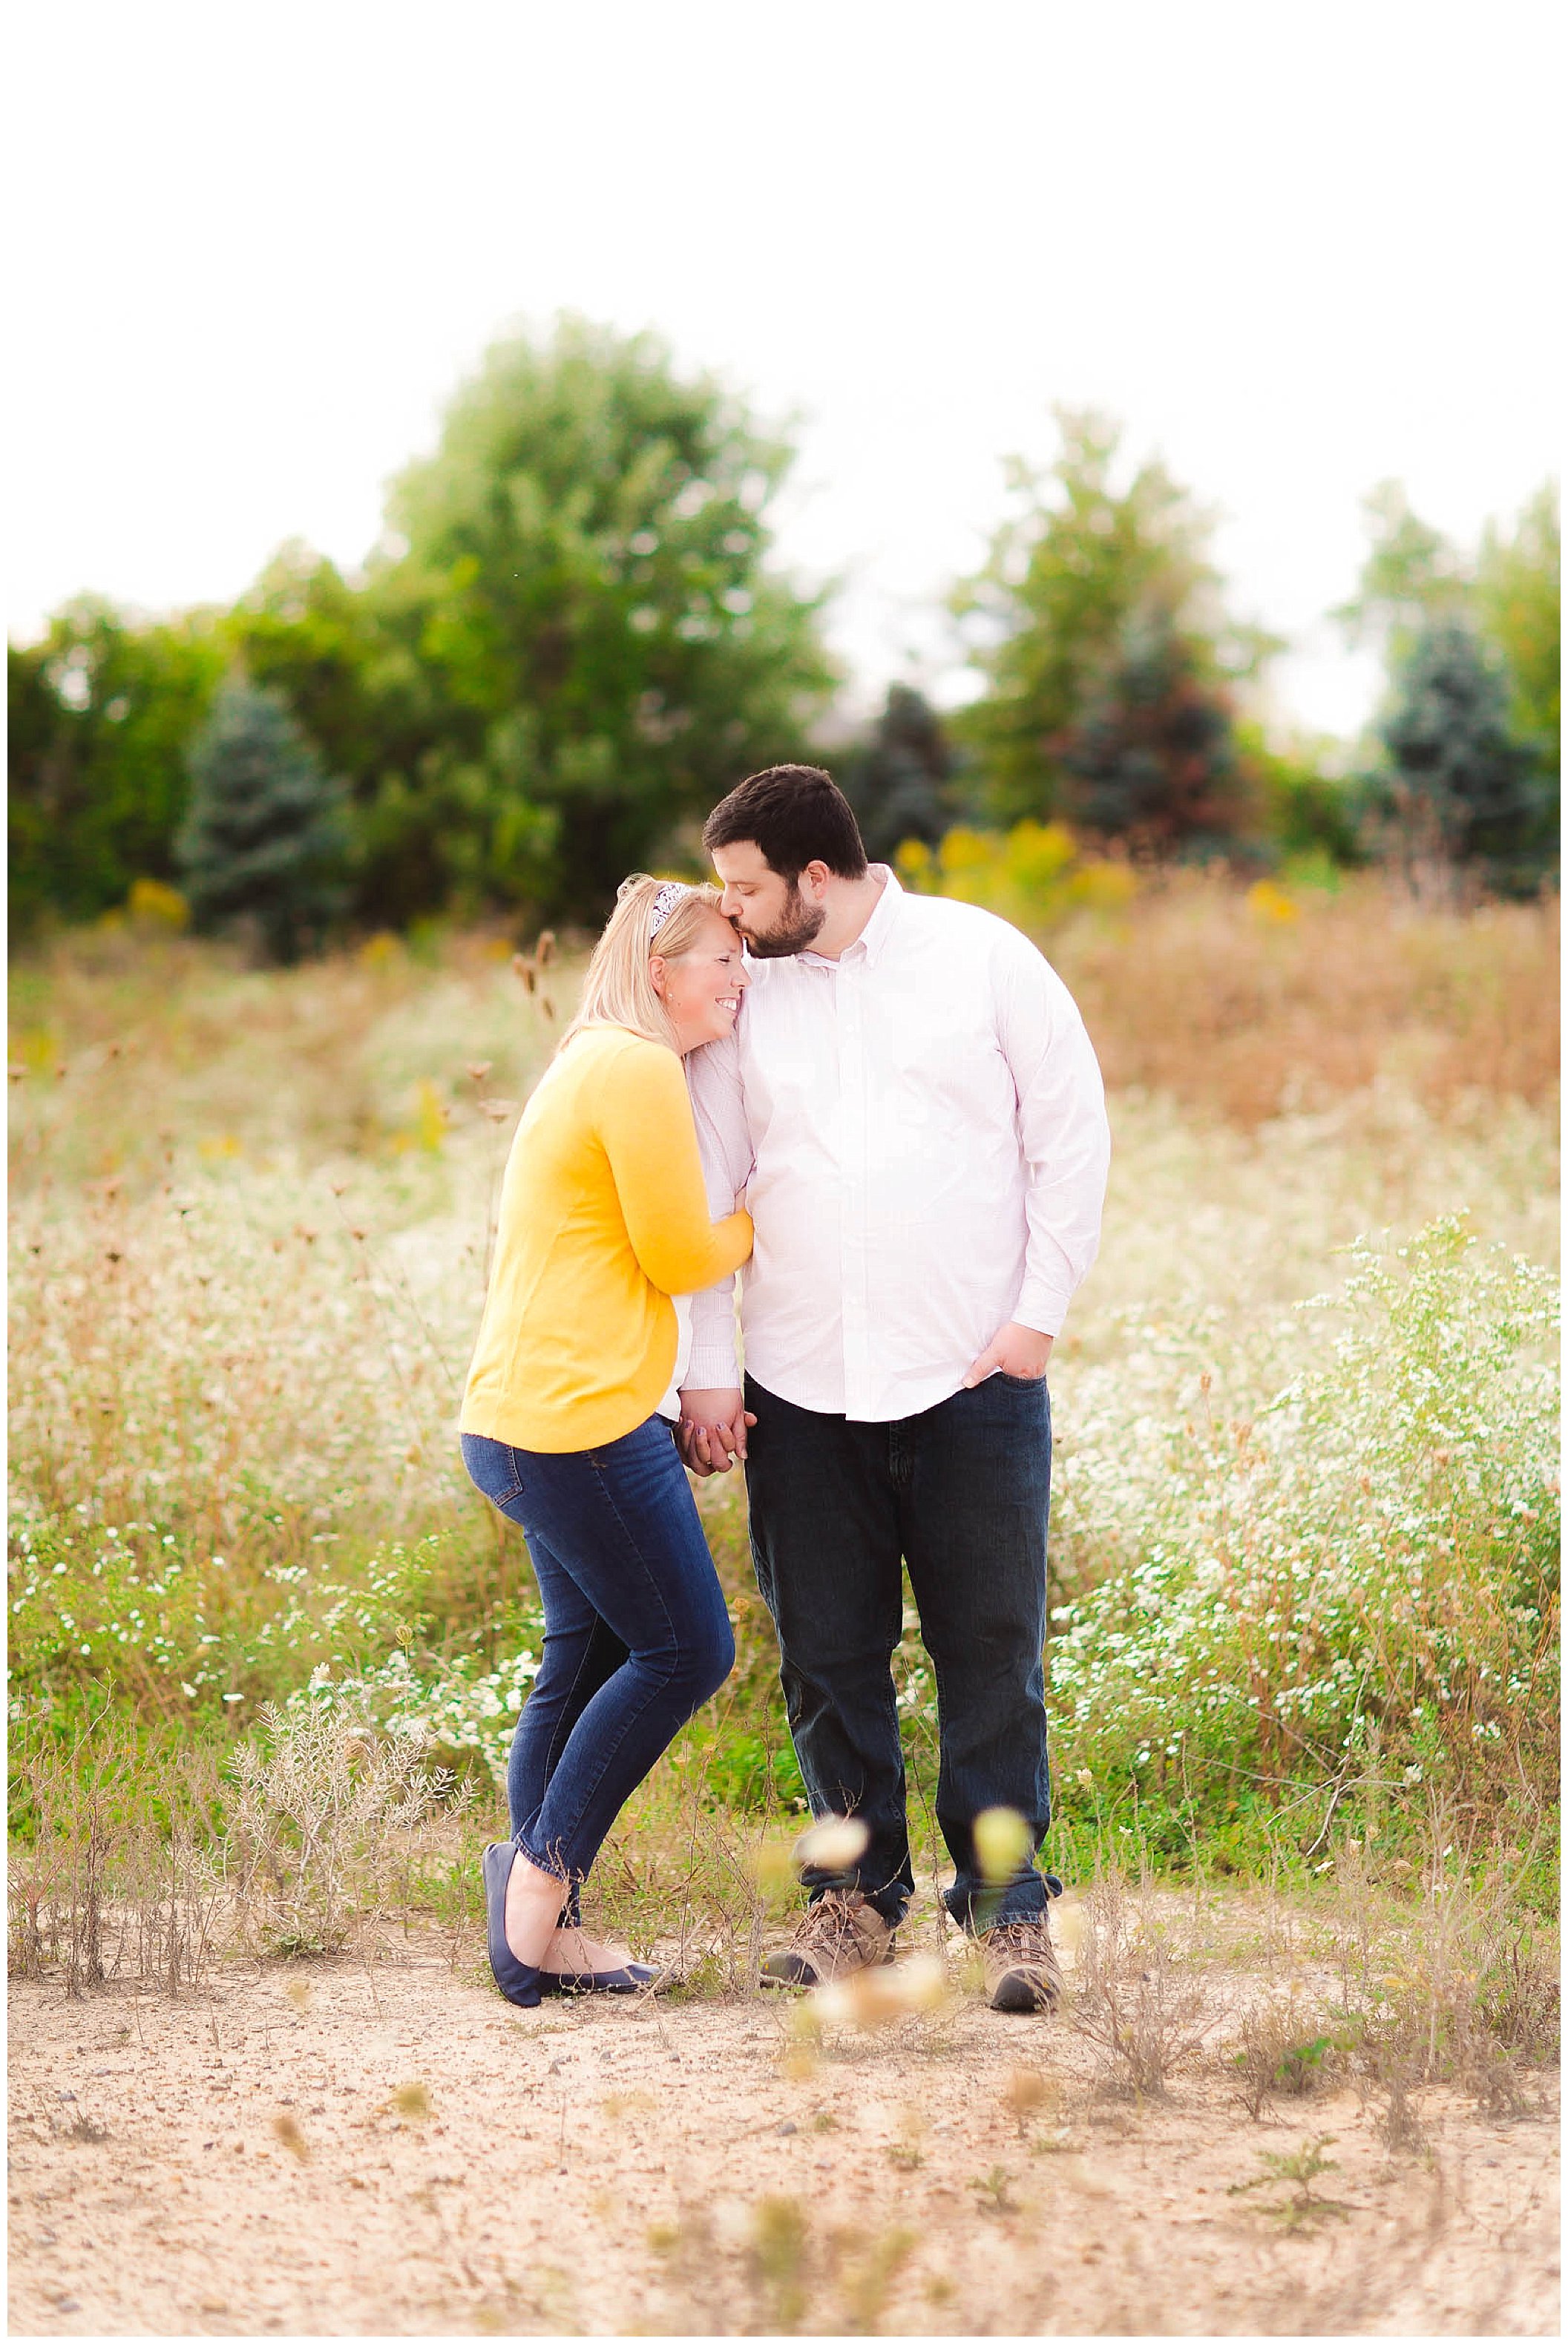 Sunshine filled engagement session in a field of wildflowers, Fort Wayne Indiana Wedding Photographer_0018.jpg